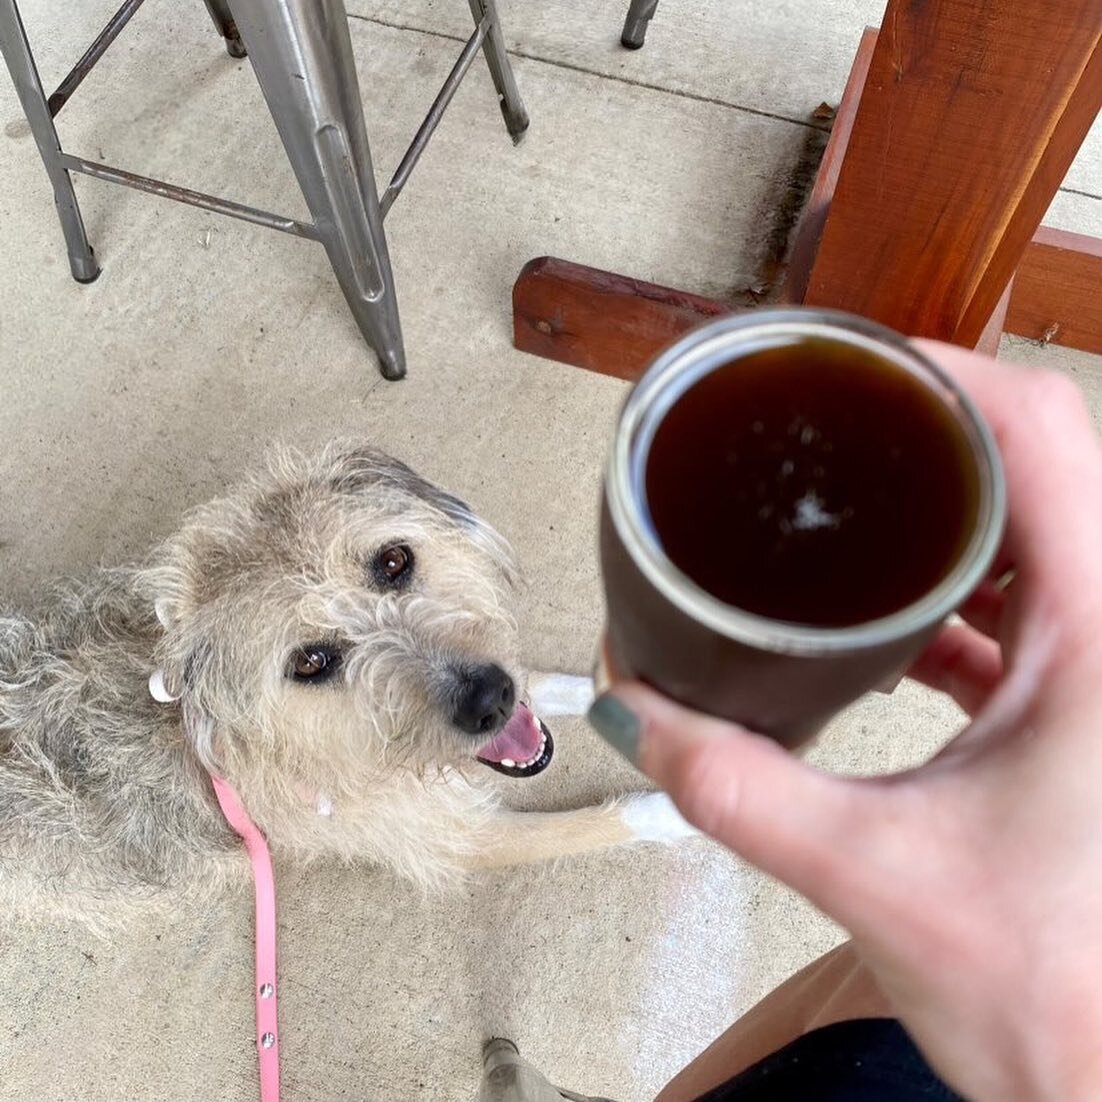 Happy National Pet Day! These awesome pics come courtesy of Maya the Pup ( @little_meez )🐾 hangin at the beer garden with her humans. We love our fur-friends! Thanks Maya &amp; Co! 

Has your dog been to visit us yet??

#nationalpetday #mayathepup #